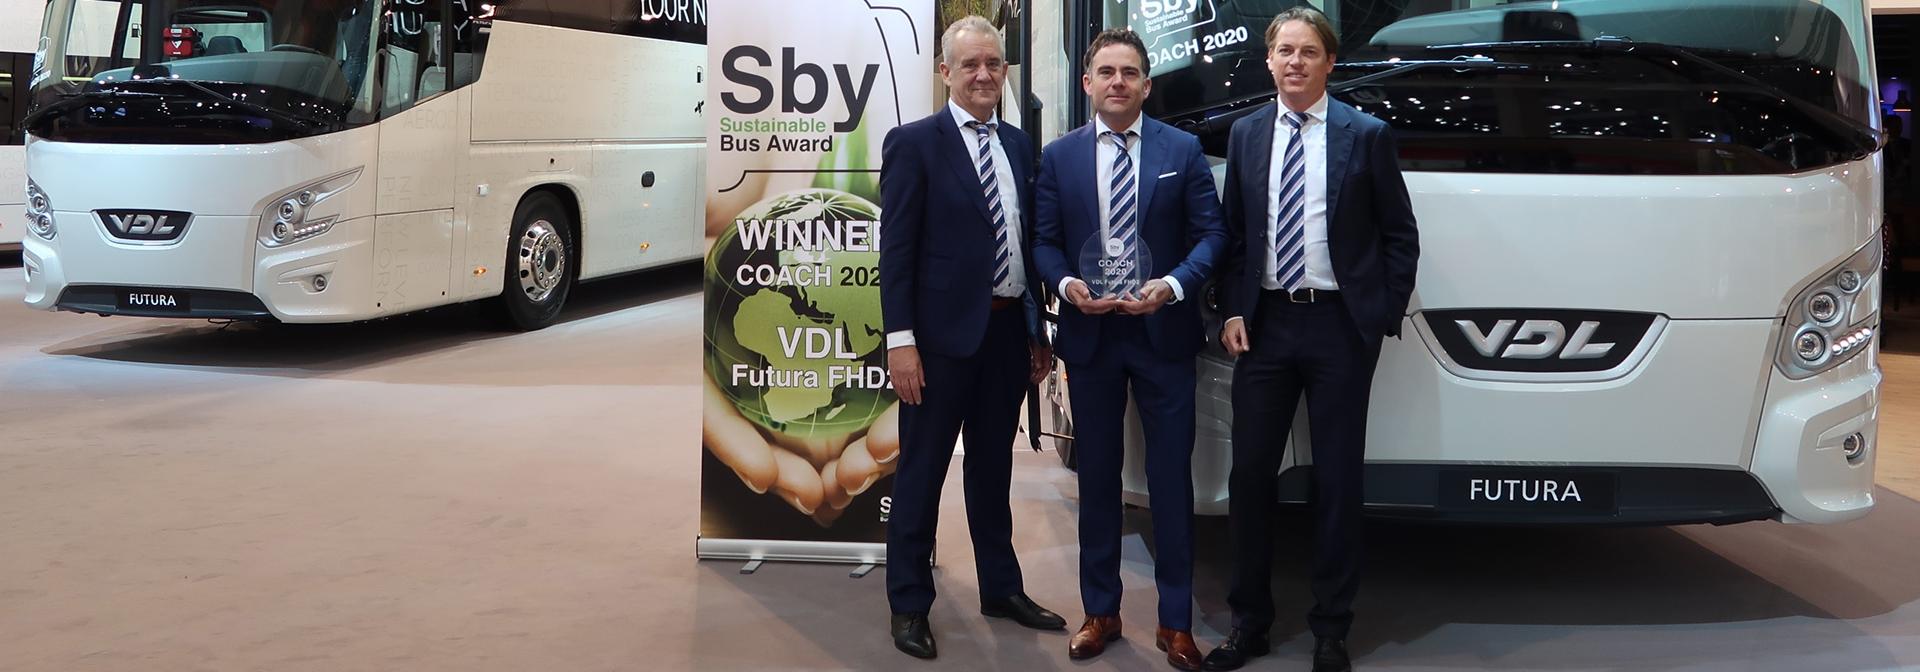 Henk Coppens (CEO), Pieter Gerdingh (Business Manager Coach) and Marcel Jacobs (Commercial Director) from VDL Bus & Coach.
